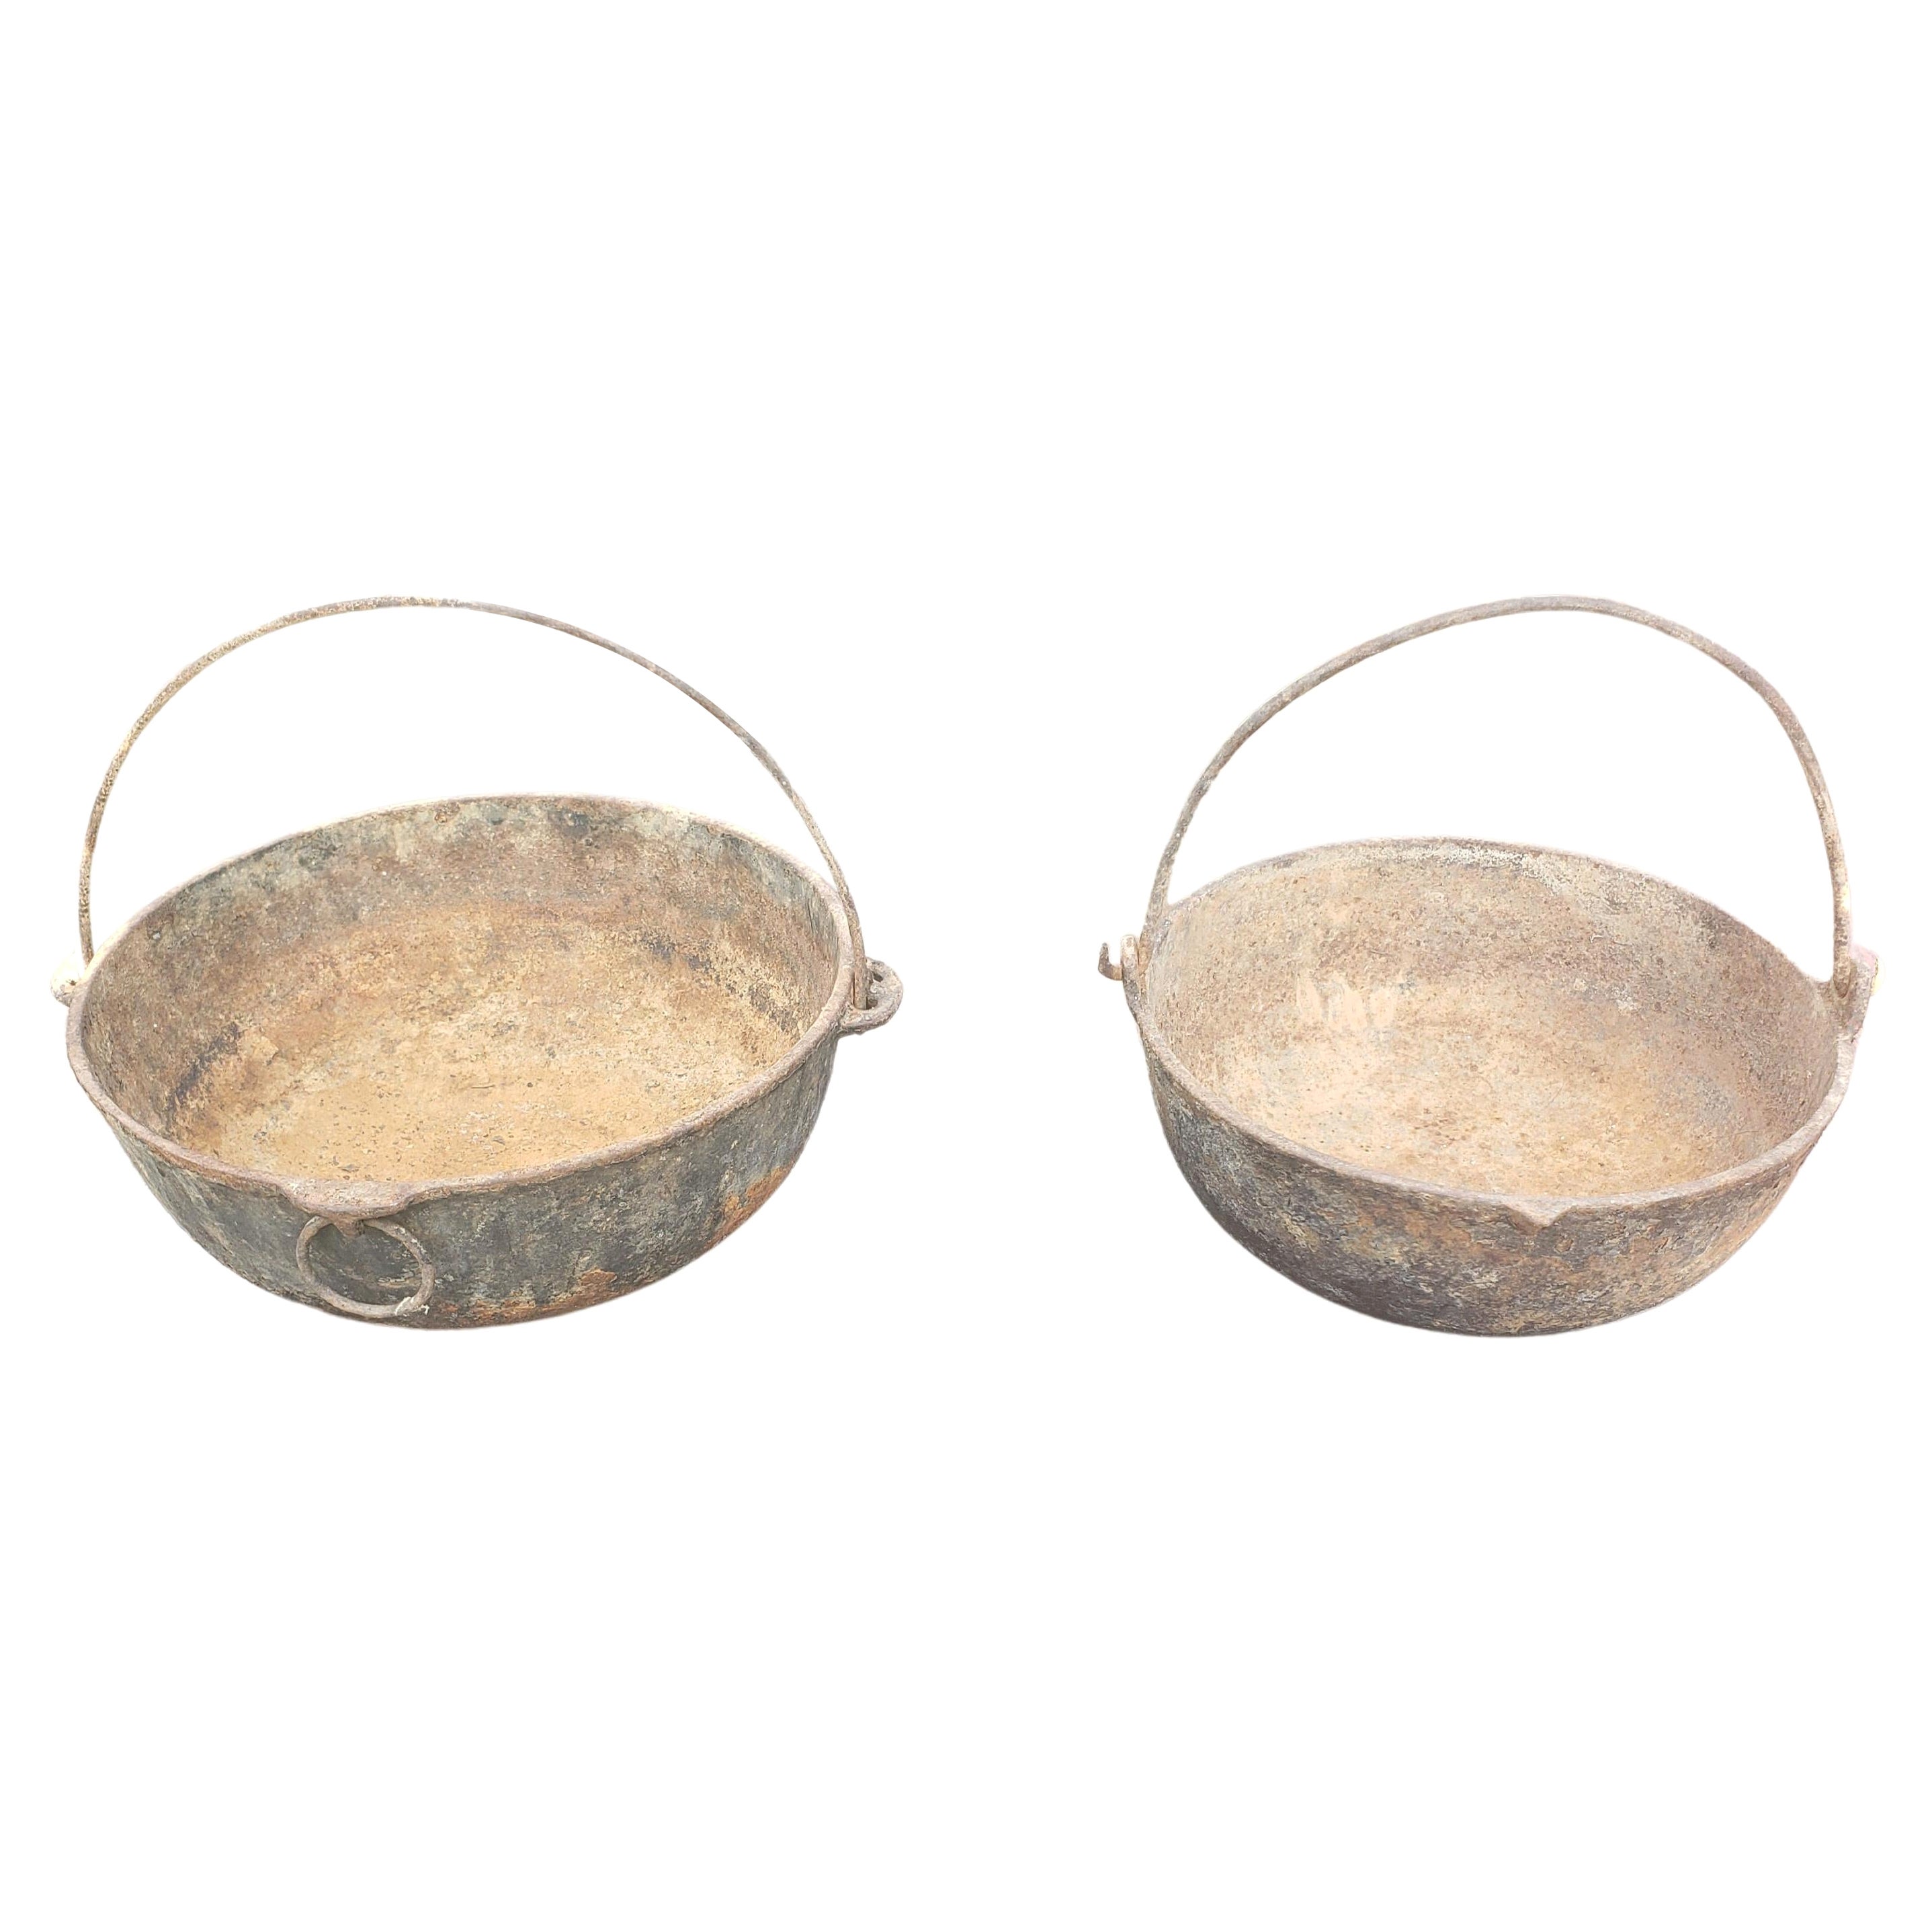 Vintage Hanging Kettles with Wonderful Rustic Patina circa 1900s, a Pair For Sale